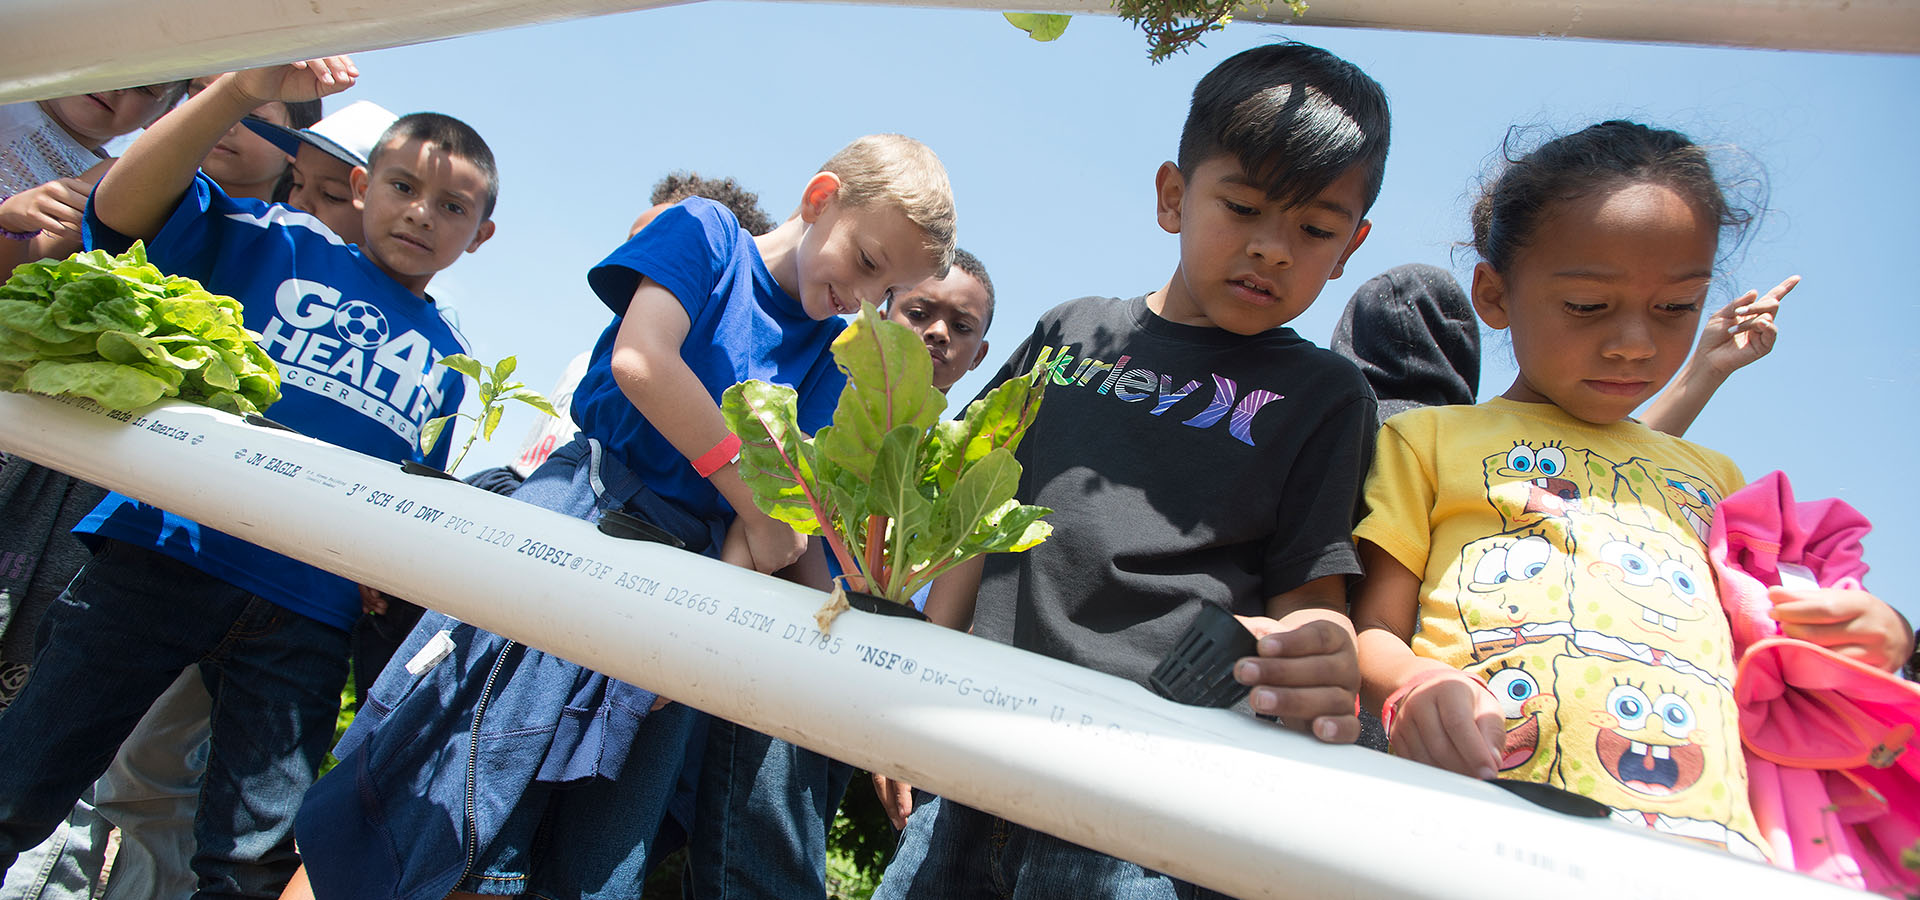 Schoolchildren look at plants growing outdoors in a hydroponic system.